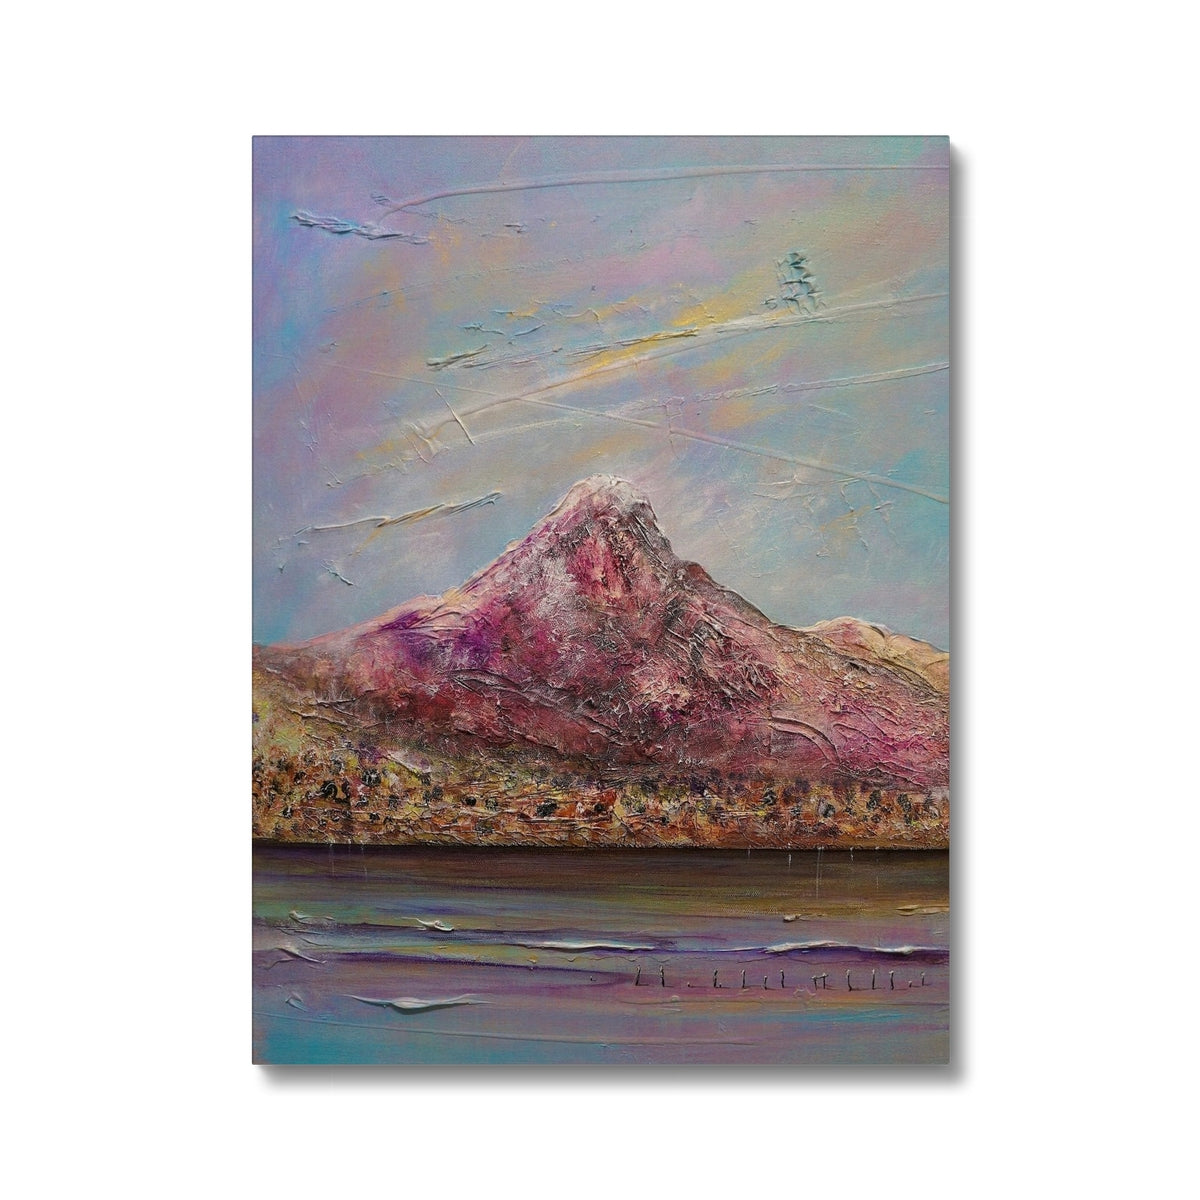 Ben Lomond Painting | Canvas-Contemporary Stretched Canvas Prints-Scottish Lochs & Mountains Art Gallery-18"x24"-Paintings, Prints, Homeware, Art Gifts From Scotland By Scottish Artist Kevin Hunter